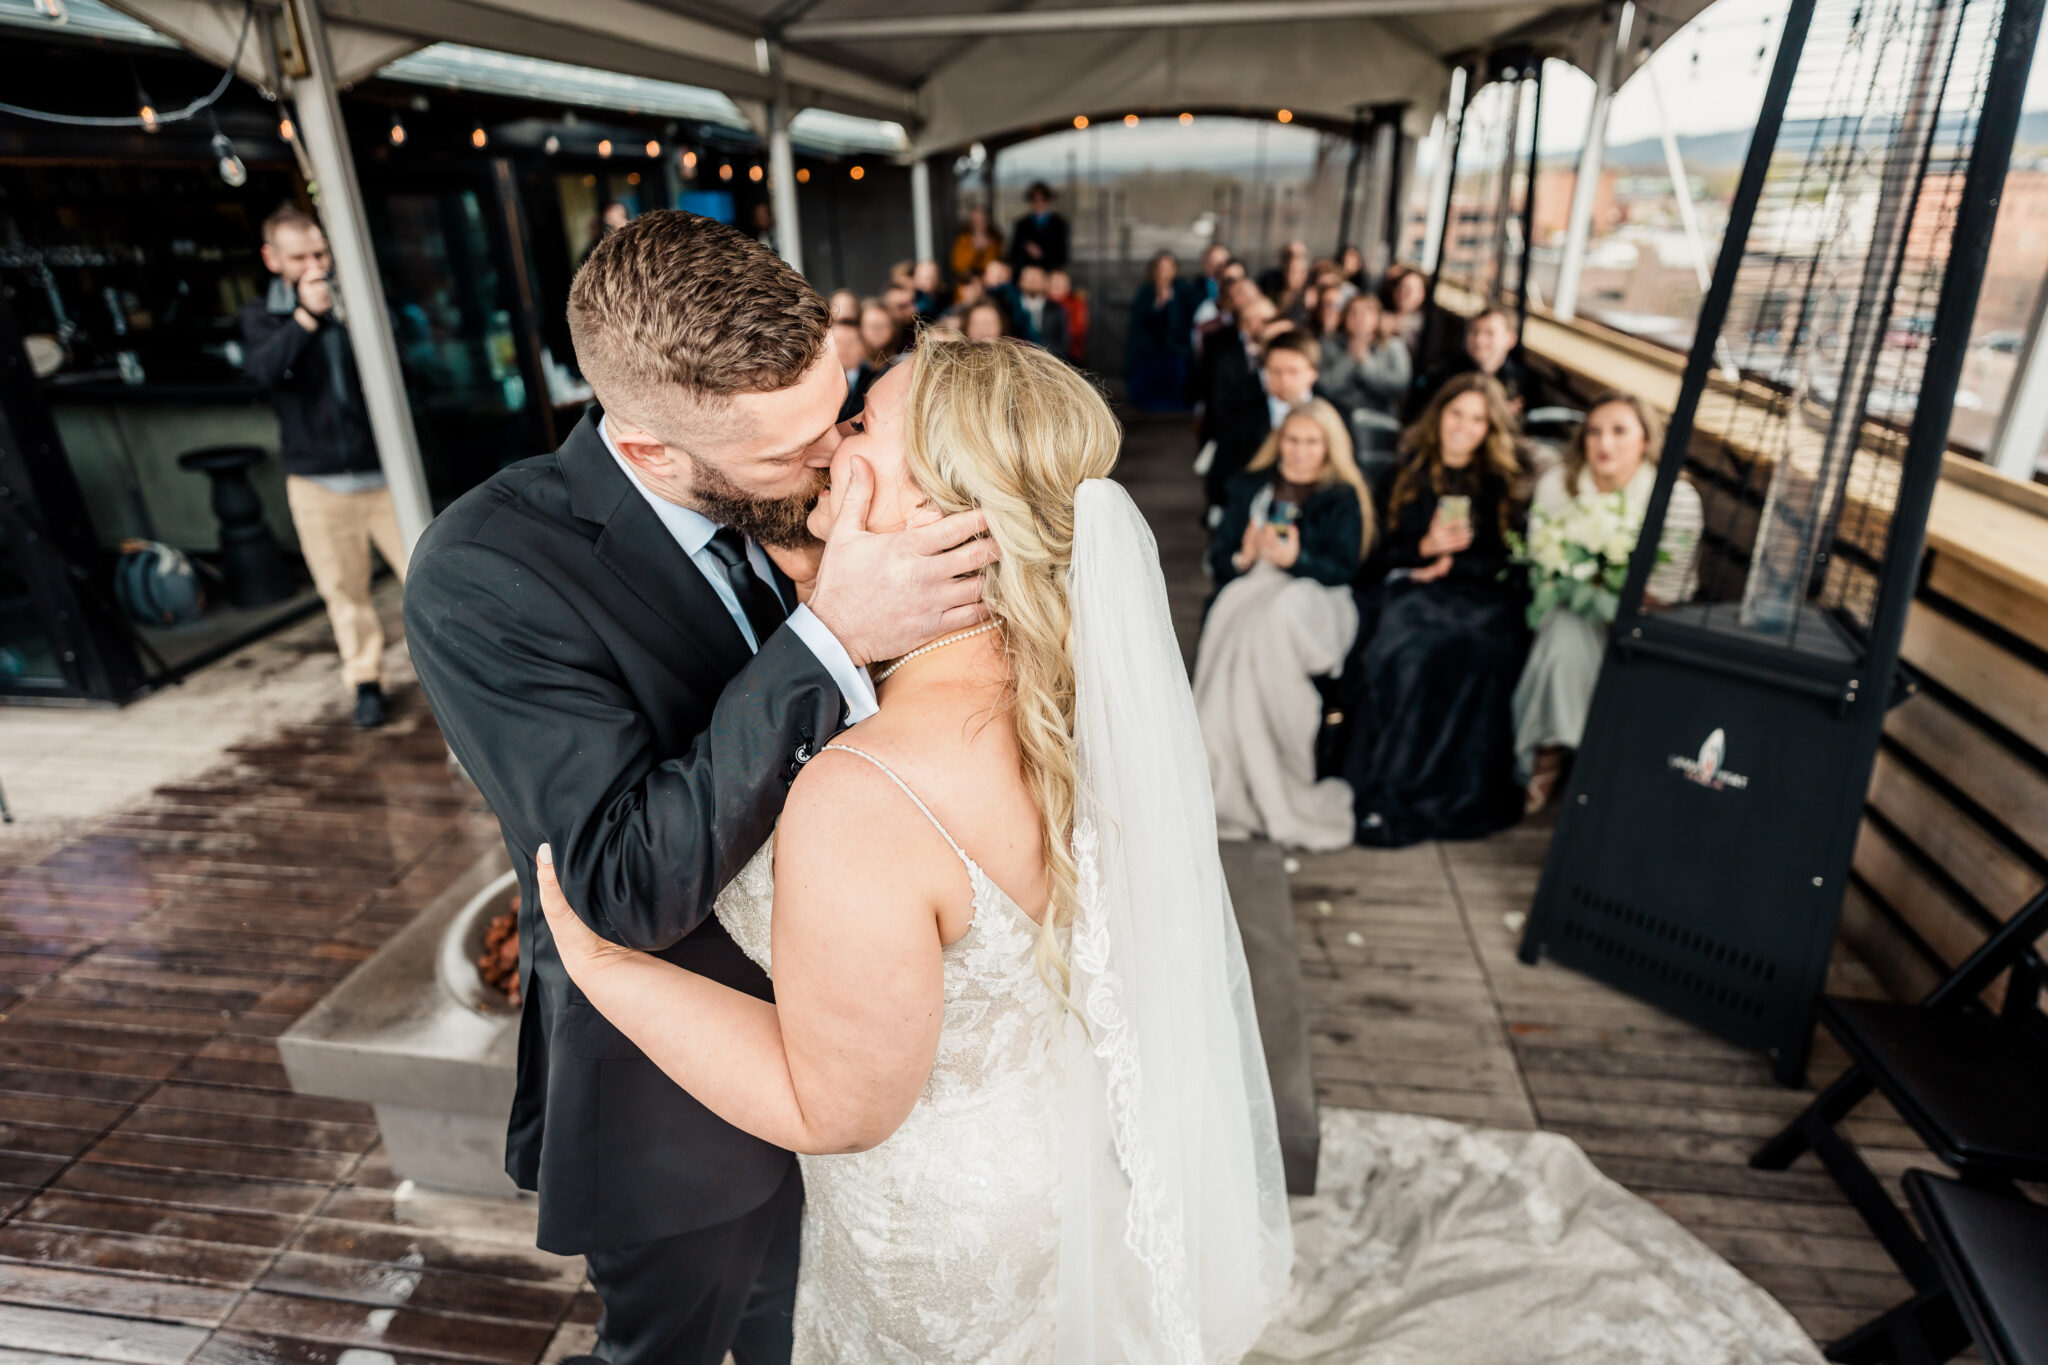 A bride and groom kissing on the roof of a building.